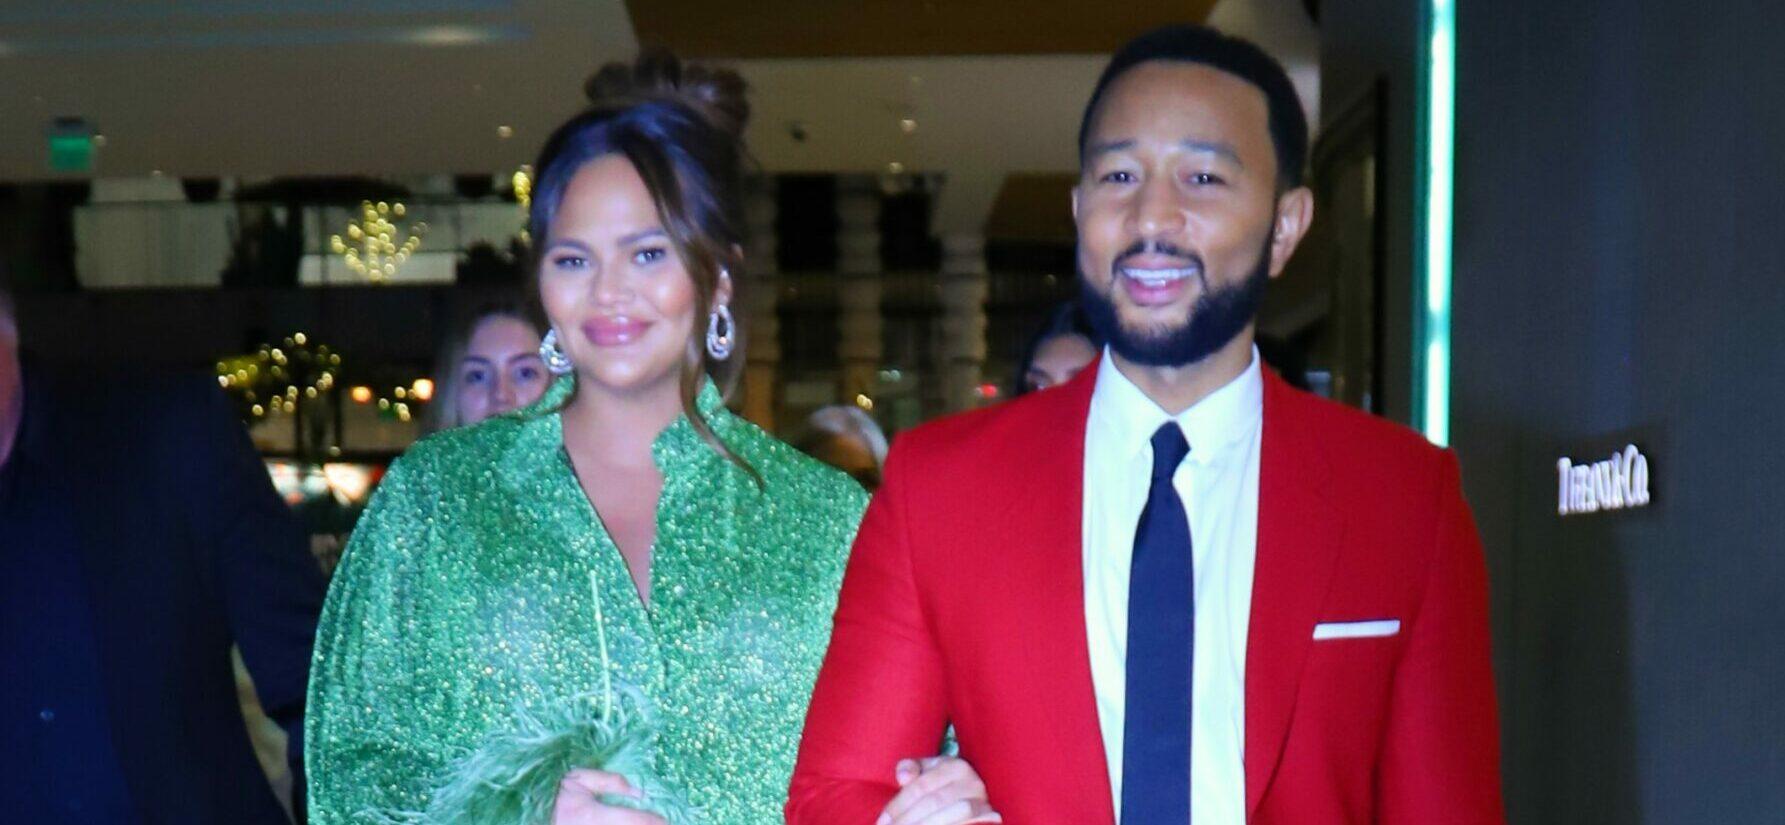 Chrissy Teigen and husband John Legend promote her Cravings cook book meet and greet at Westfield Mall holiday tribute